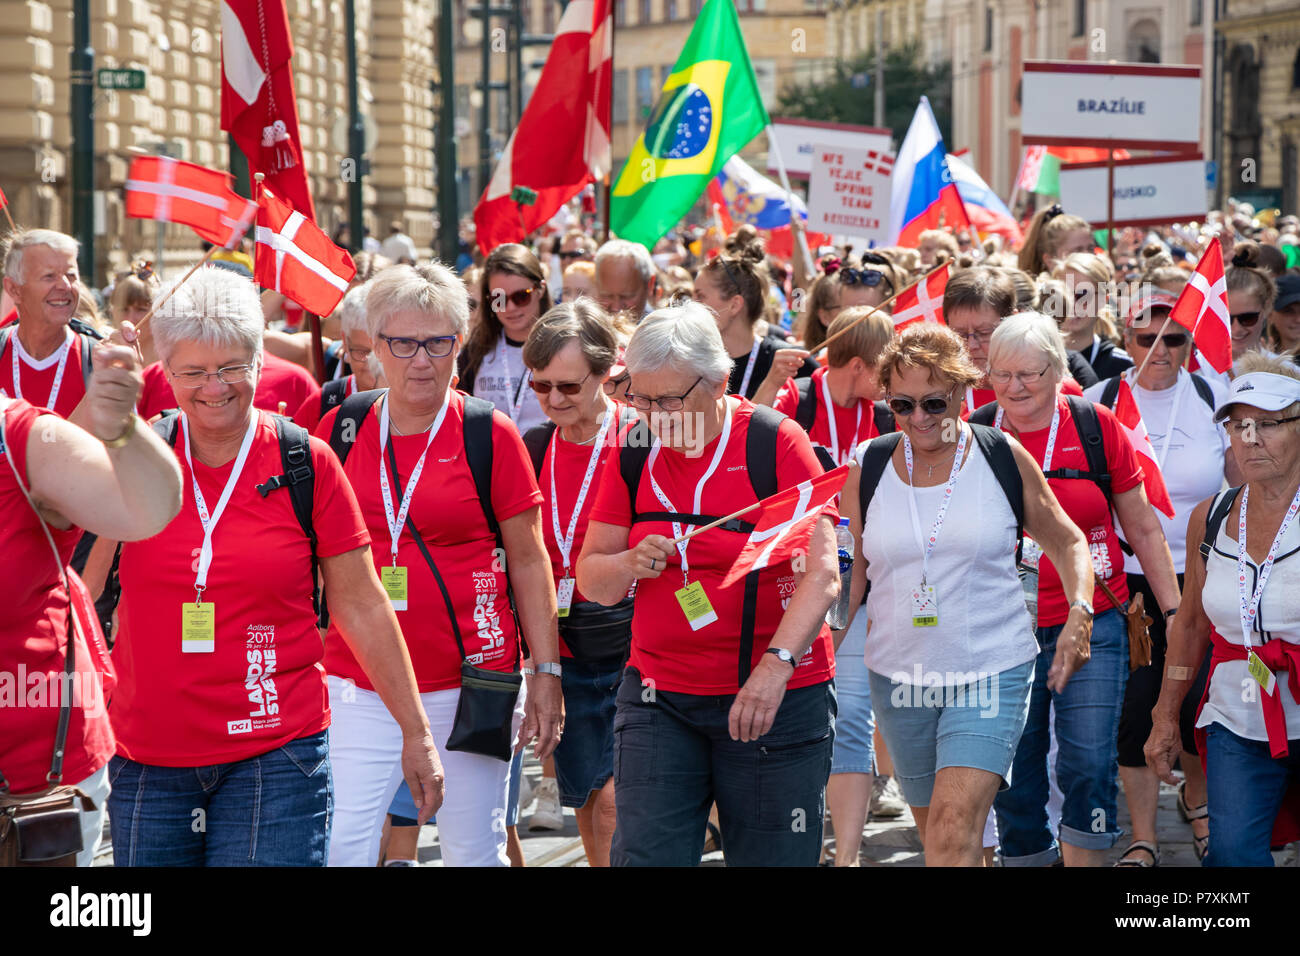 PRAGUE, CZECH REPUBLIC - JULY 1, 2018: Swiss visitors parading at Sokolsky Slet, a once-every-six-years gathering of the Sokol movement - a Czech spor Stock Photo